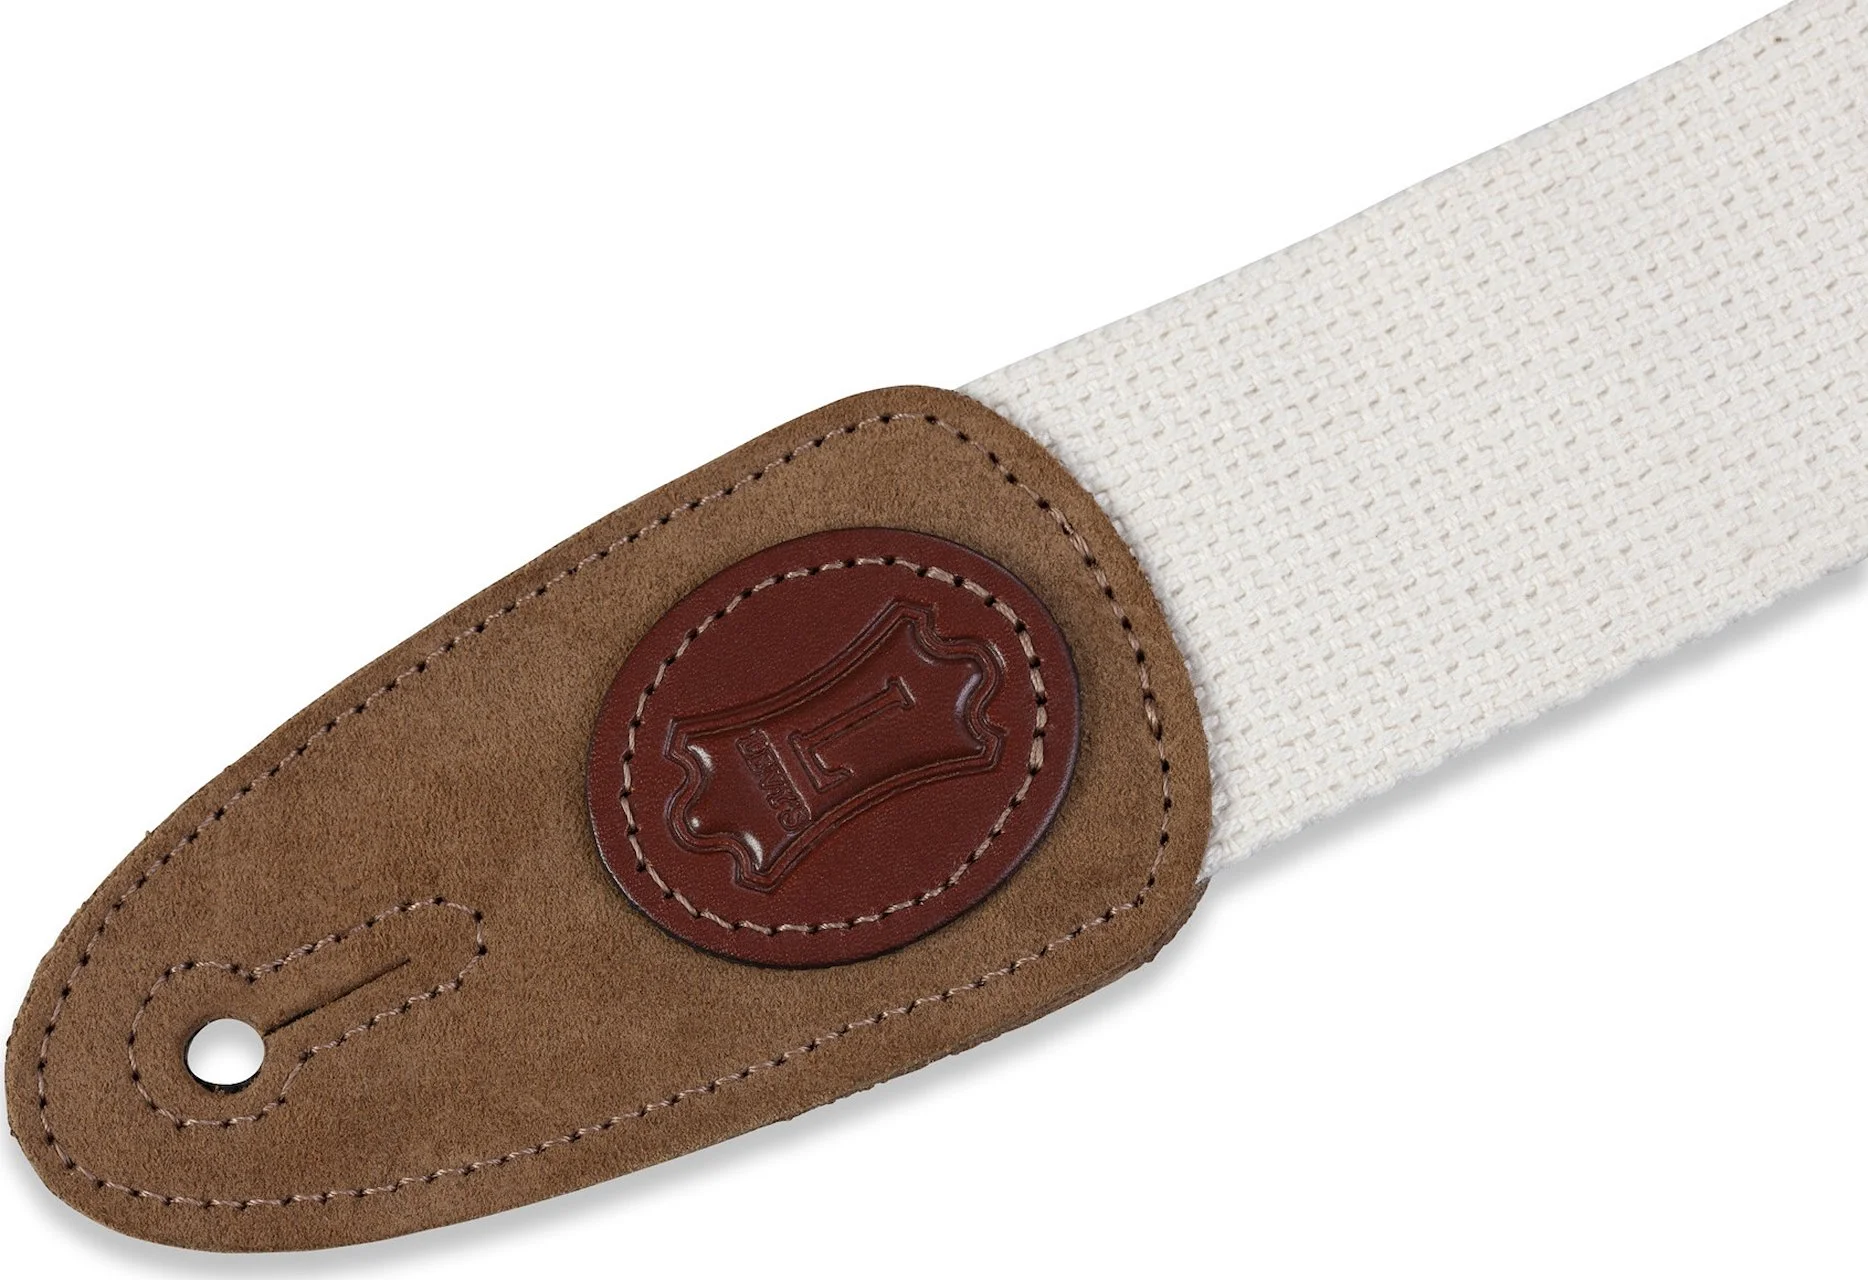 Levys 2 Inch Cotton Guitar Strap with Leather Ends Desert Camouflage 